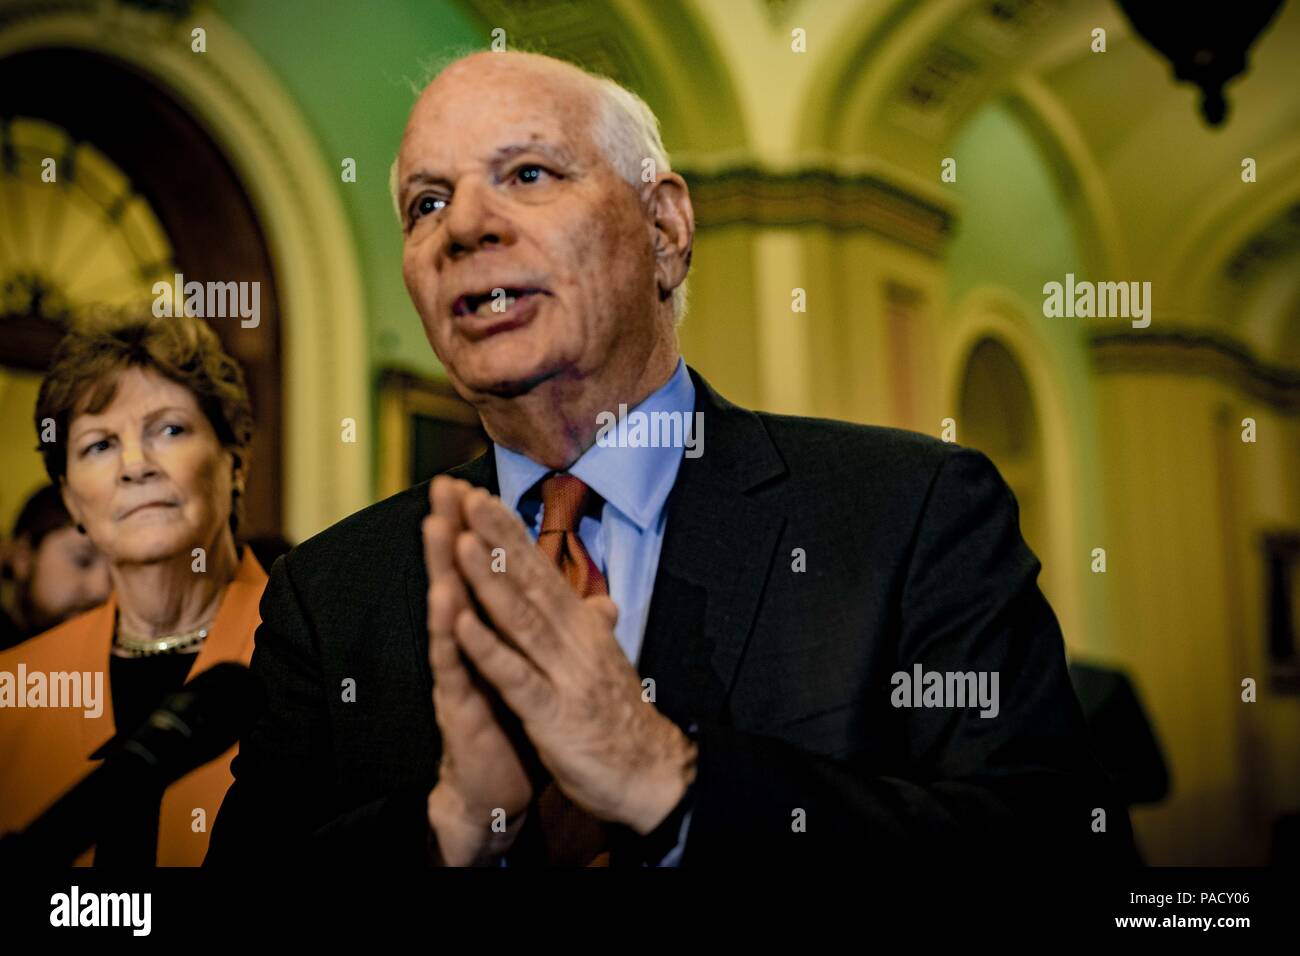 Washington, District of Columbia, USA. 17th July, 2018. Democratic Senators JEANNE SHAHEEN (D-NH) and BEN CARDIN (D-MD) at the Tuesday briefing, July 17, 2018 Credit: Douglas Christian/ZUMA Wire/Alamy Live News Stock Photo